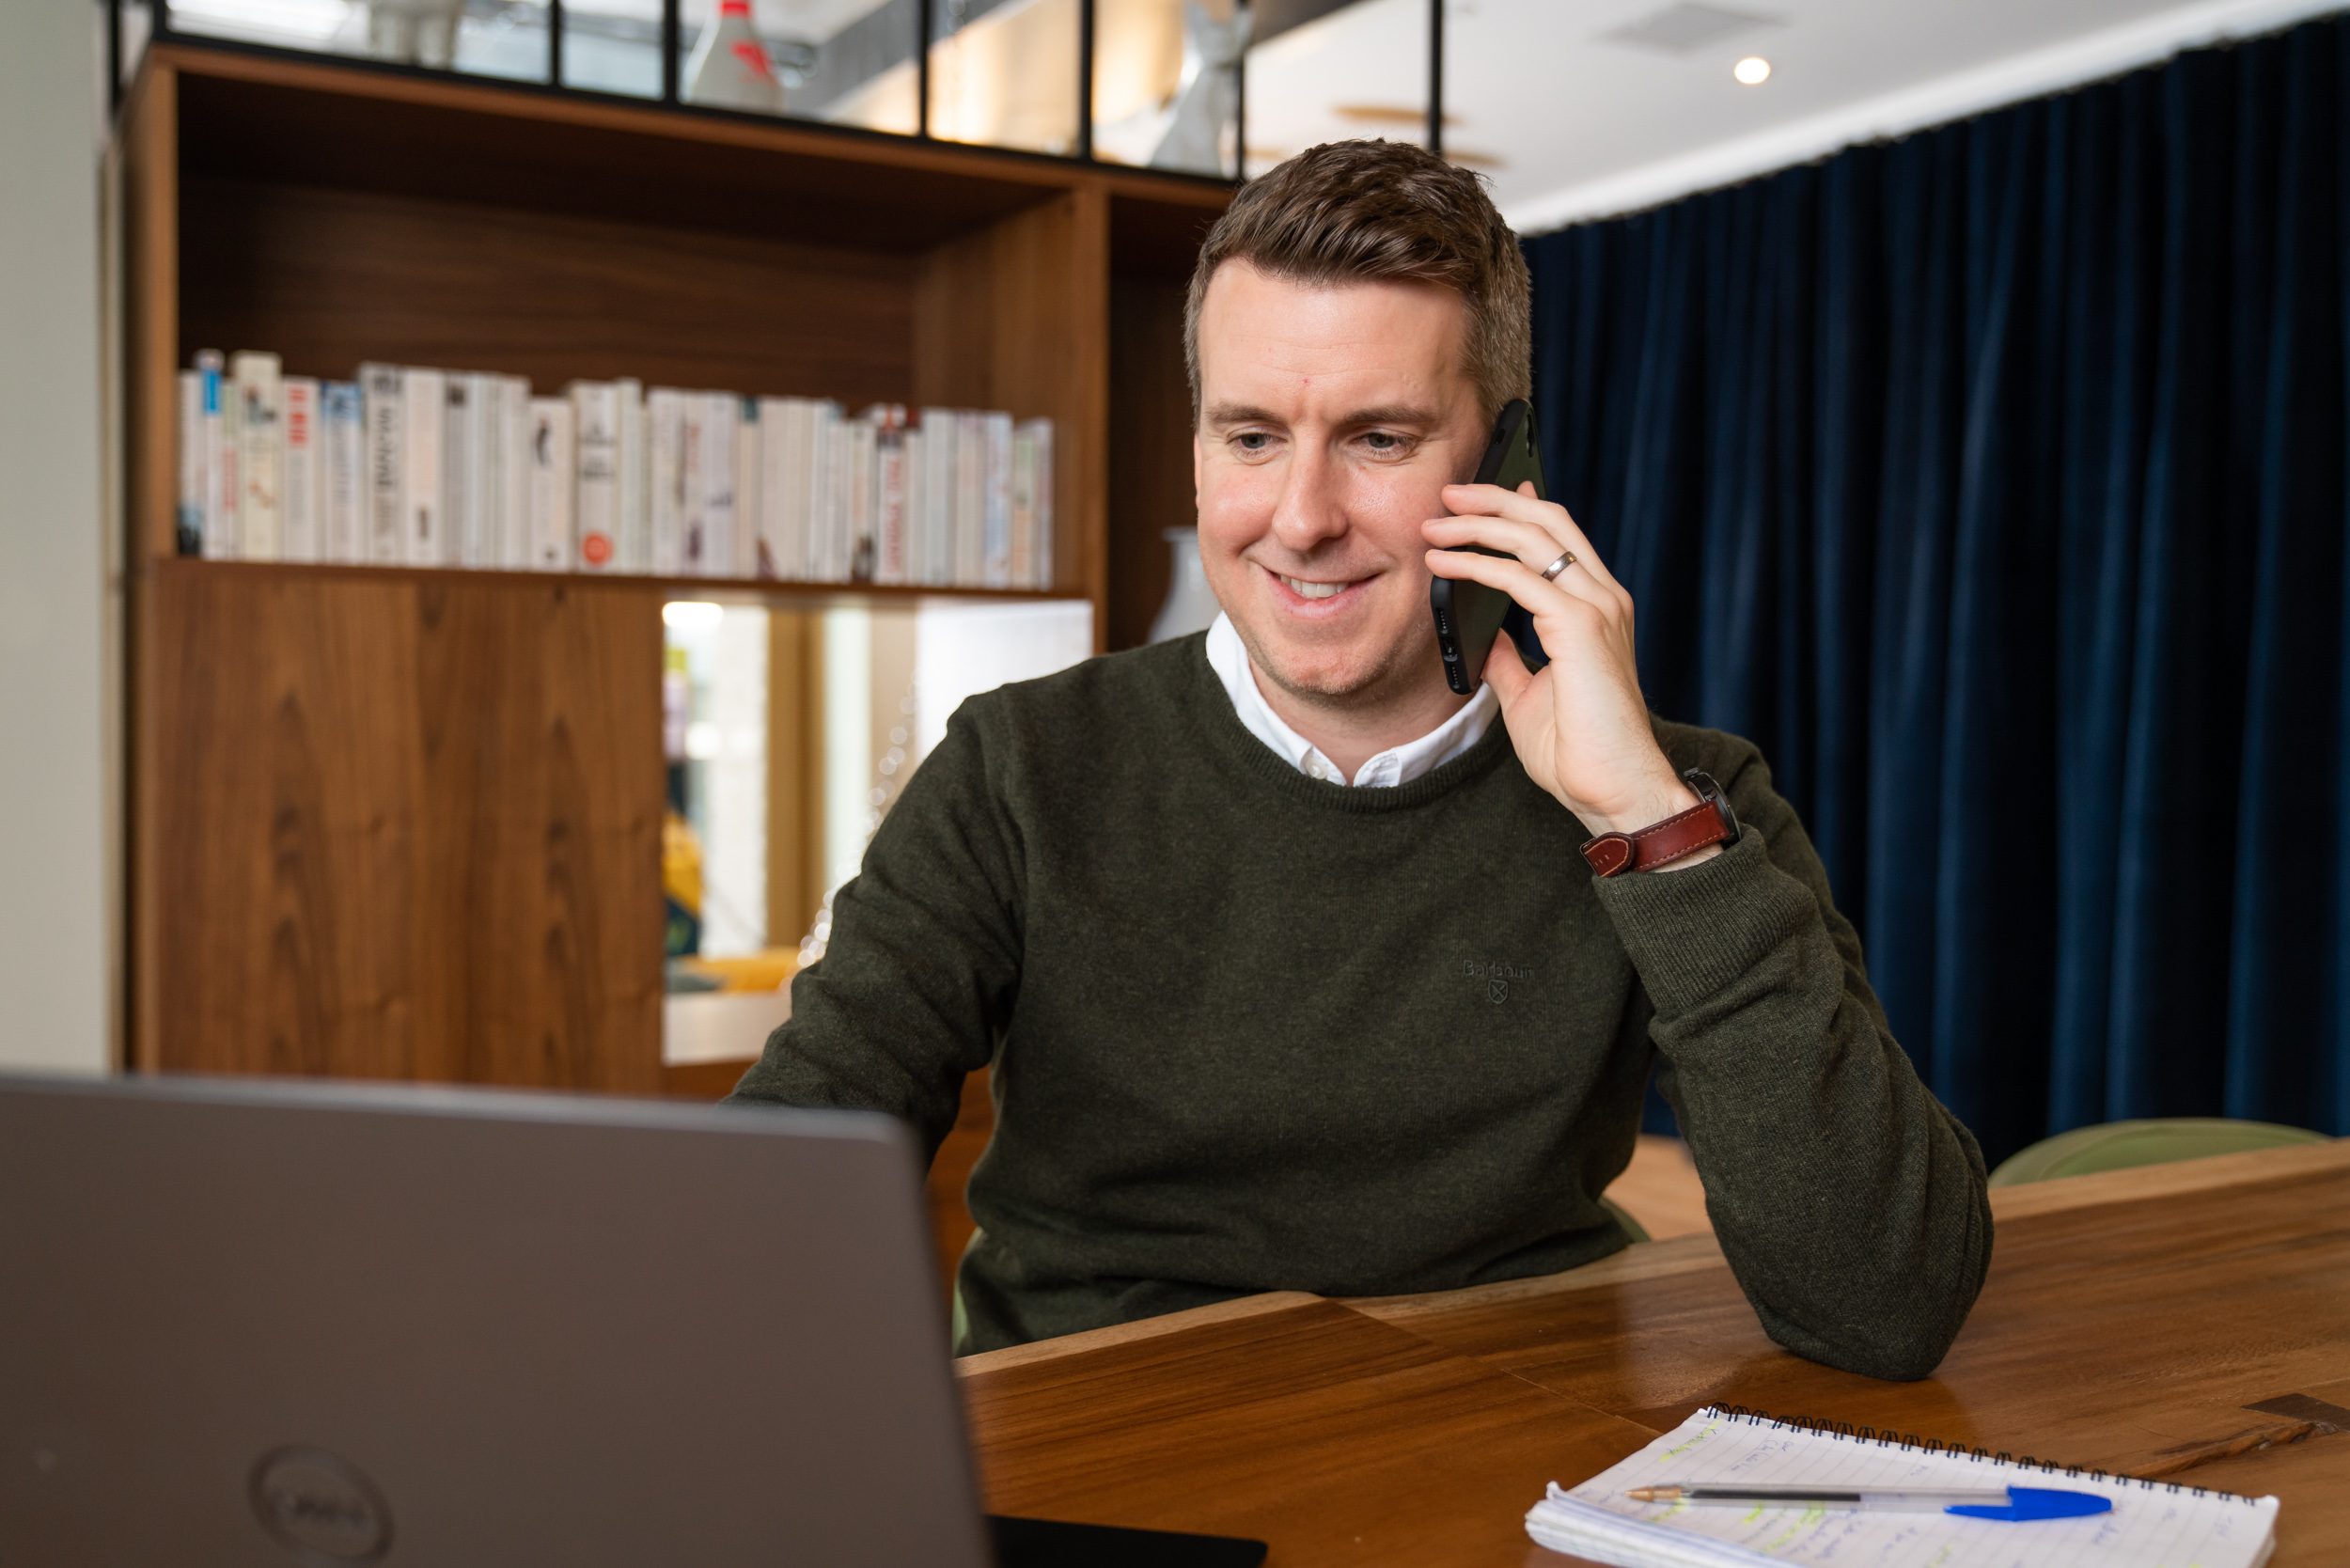 middle aged man, on phone, using laptop, working, portrait, business portrait